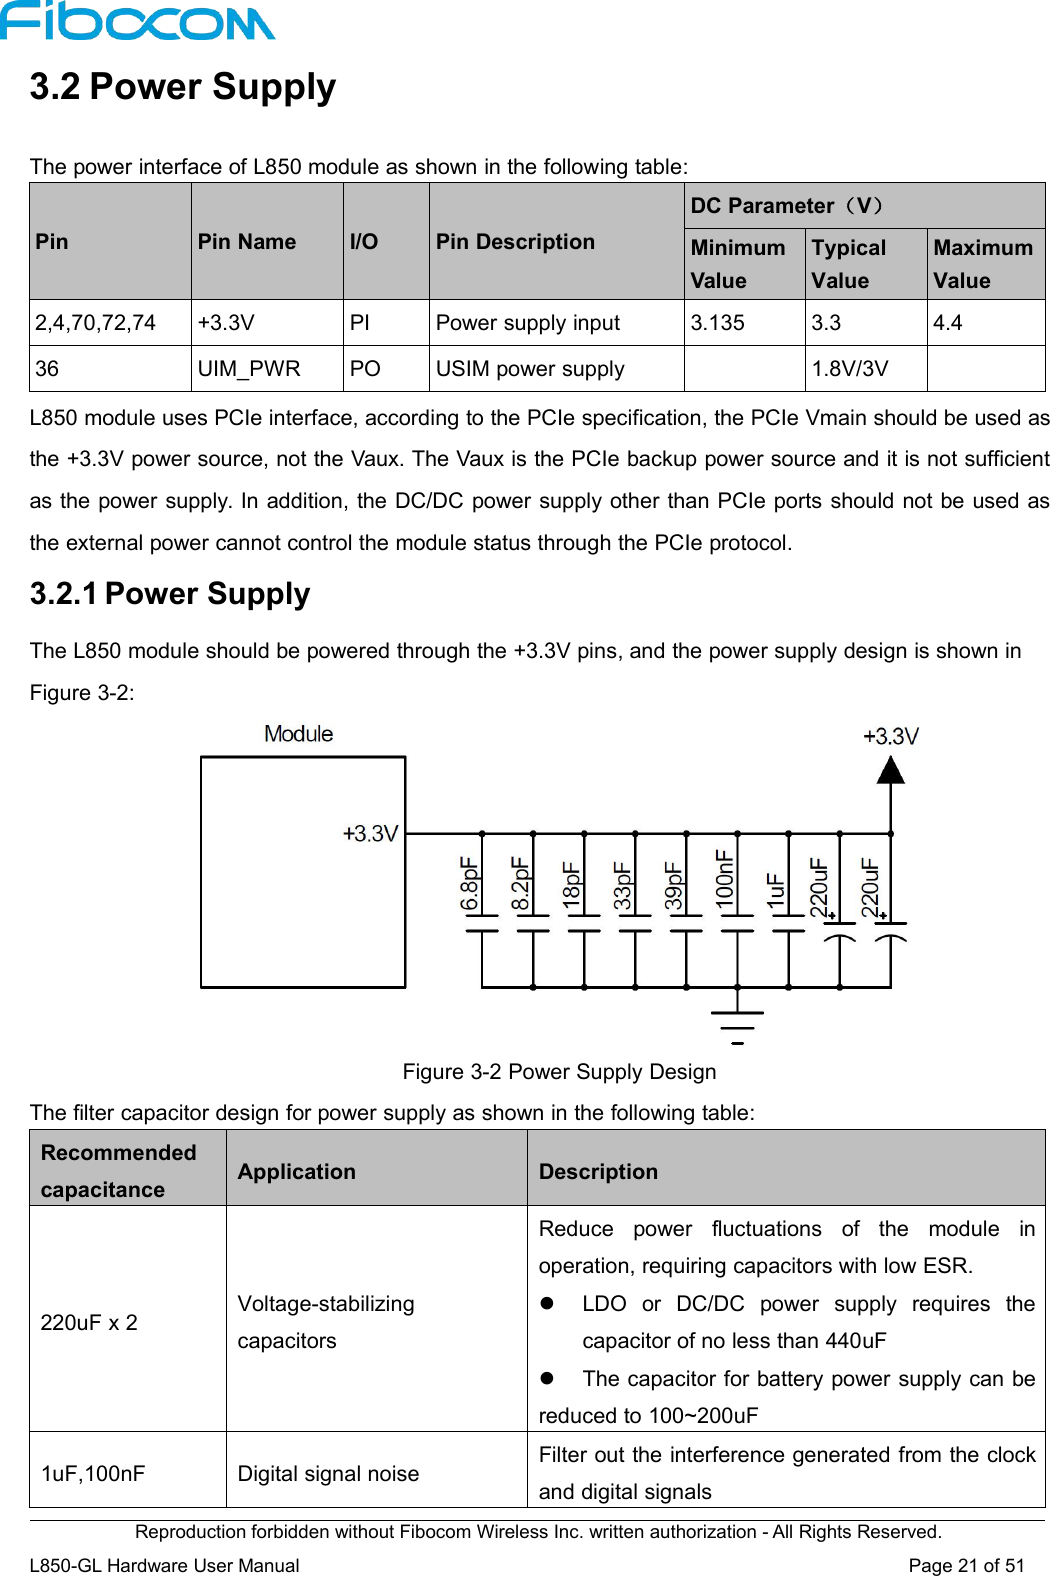 Reproduction forbidden without Fibocom Wireless Inc. written authorization - All Rights Reserved.L850-GL Hardware User Manual Page21of513.2 Power SupplyThe power interface of L850 module as shown in the following table:PinPin NameI/OPin DescriptionDC Parameter（V）MinimumValueTypicalValueMaximumValue2,4,70,72,74+3.3VPIPower supply input3.1353.34.436UIM_PWRPOUSIM power supply1.8V/3VL850 module uses PCIe interface, according to the PCIe specification, the PCIe Vmain should be used asthe +3.3V power source, not the Vaux. The Vaux is the PCIe backup power source and it is not sufficientas the power supply. In addition, the DC/DC power supply other than PCIe ports should not be used asthe external power cannot control the module status through the PCIe protocol.3.2.1 Power SupplyThe L850 module should be powered through the +3.3V pins, and the power supply design is shown inFigure 3-2:Figure 3-2 Power Supply DesignThe filter capacitor design for power supply as shown in the following table:RecommendedcapacitanceApplicationDescription220uF x 2Voltage-stabilizingcapacitorsReduce power fluctuations of the module inoperation, requiring capacitors with low ESR.LDO or DC/DC power supply requires thecapacitor of no less than 440uFThe capacitor for battery power supply can bereduced to 100~200uF1uF,100nFDigital signal noiseFilter out the interference generated from the clockand digital signals